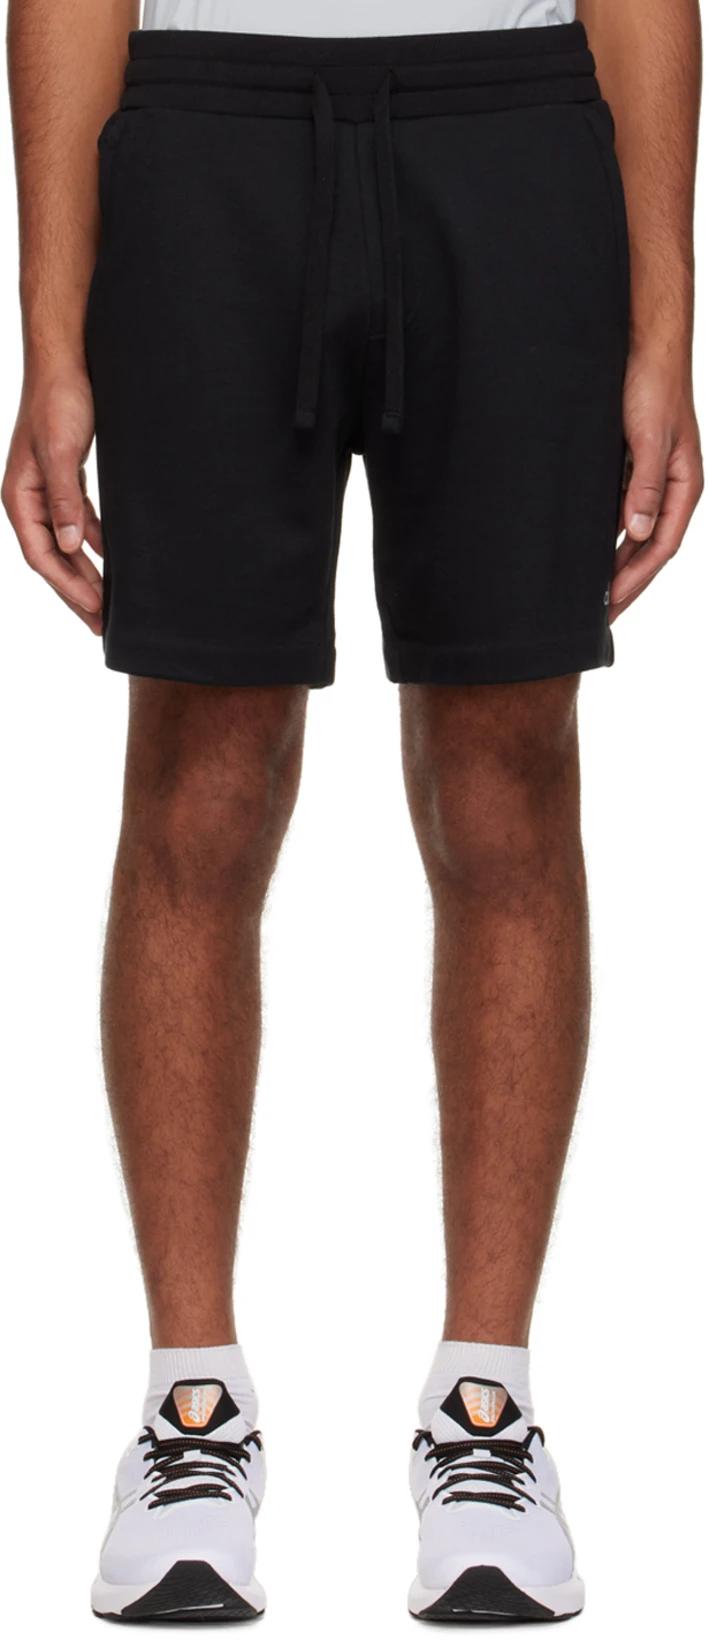 Black Chill Shorts by ALO YOGA